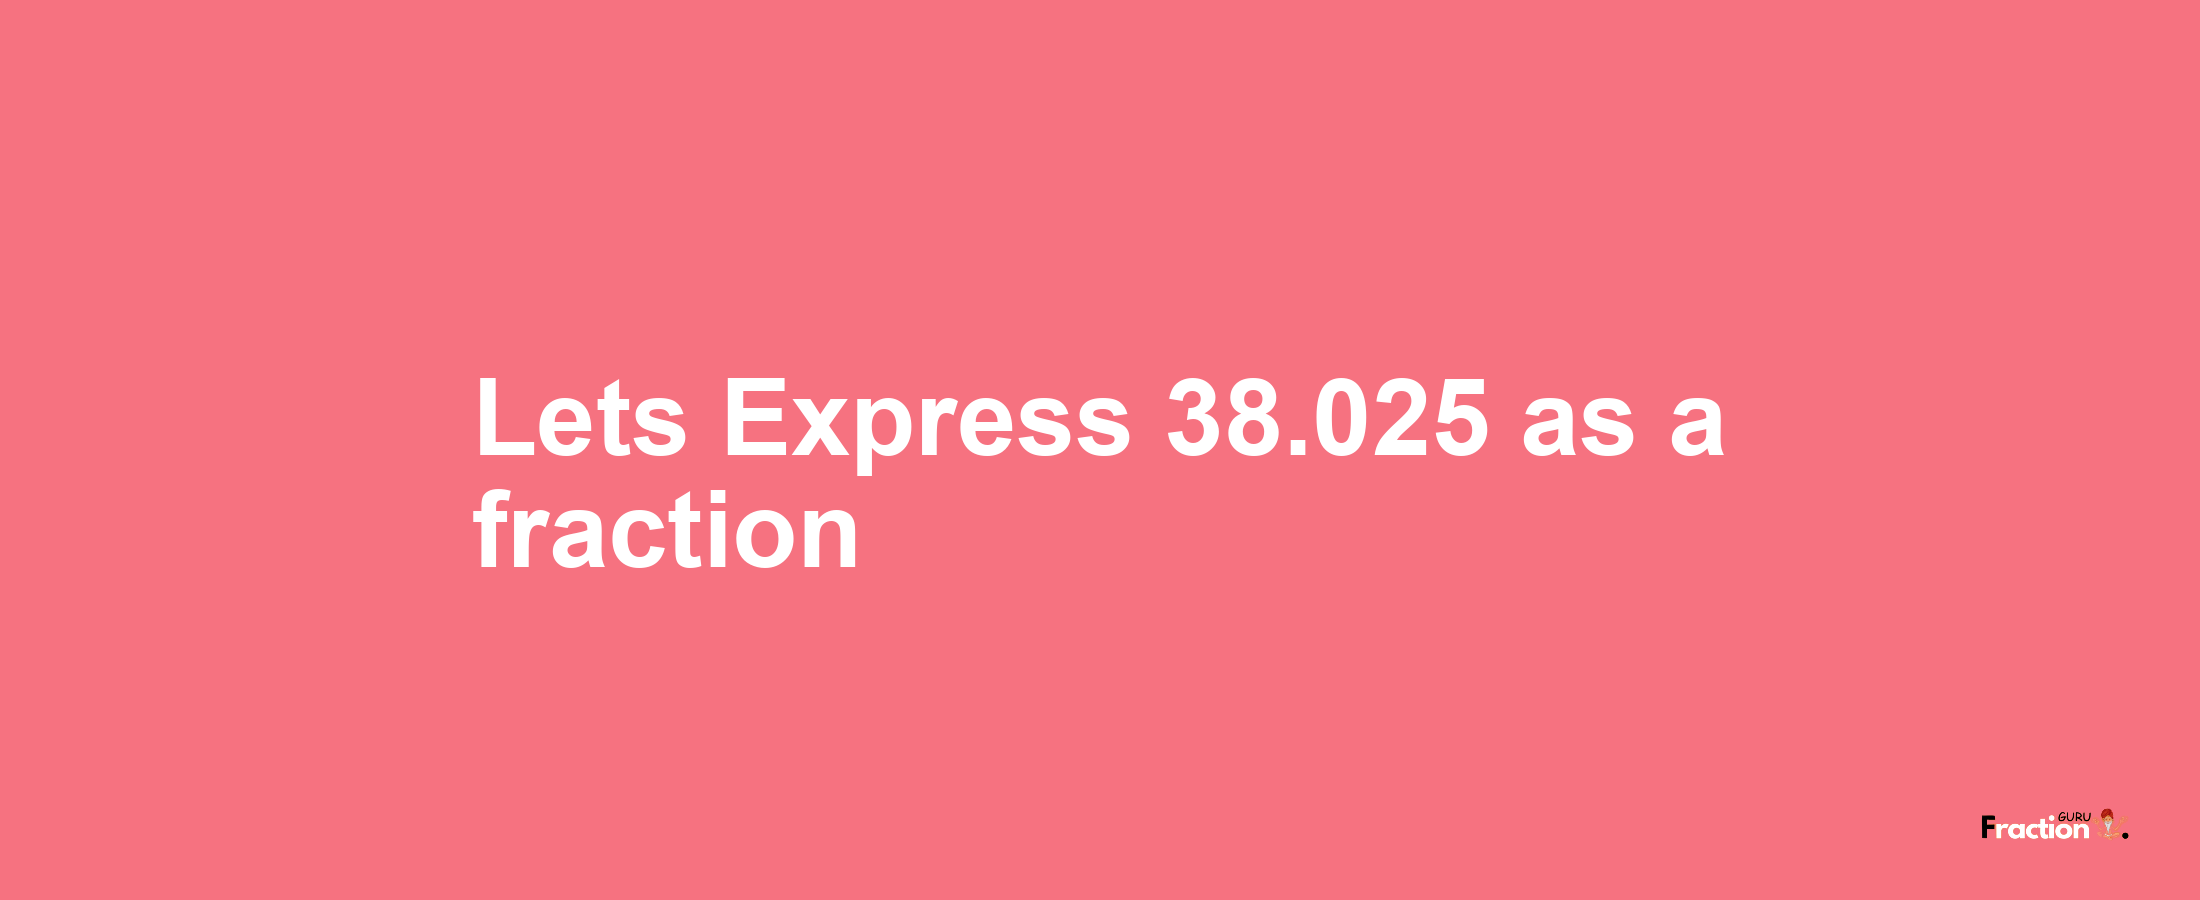 Lets Express 38.025 as afraction